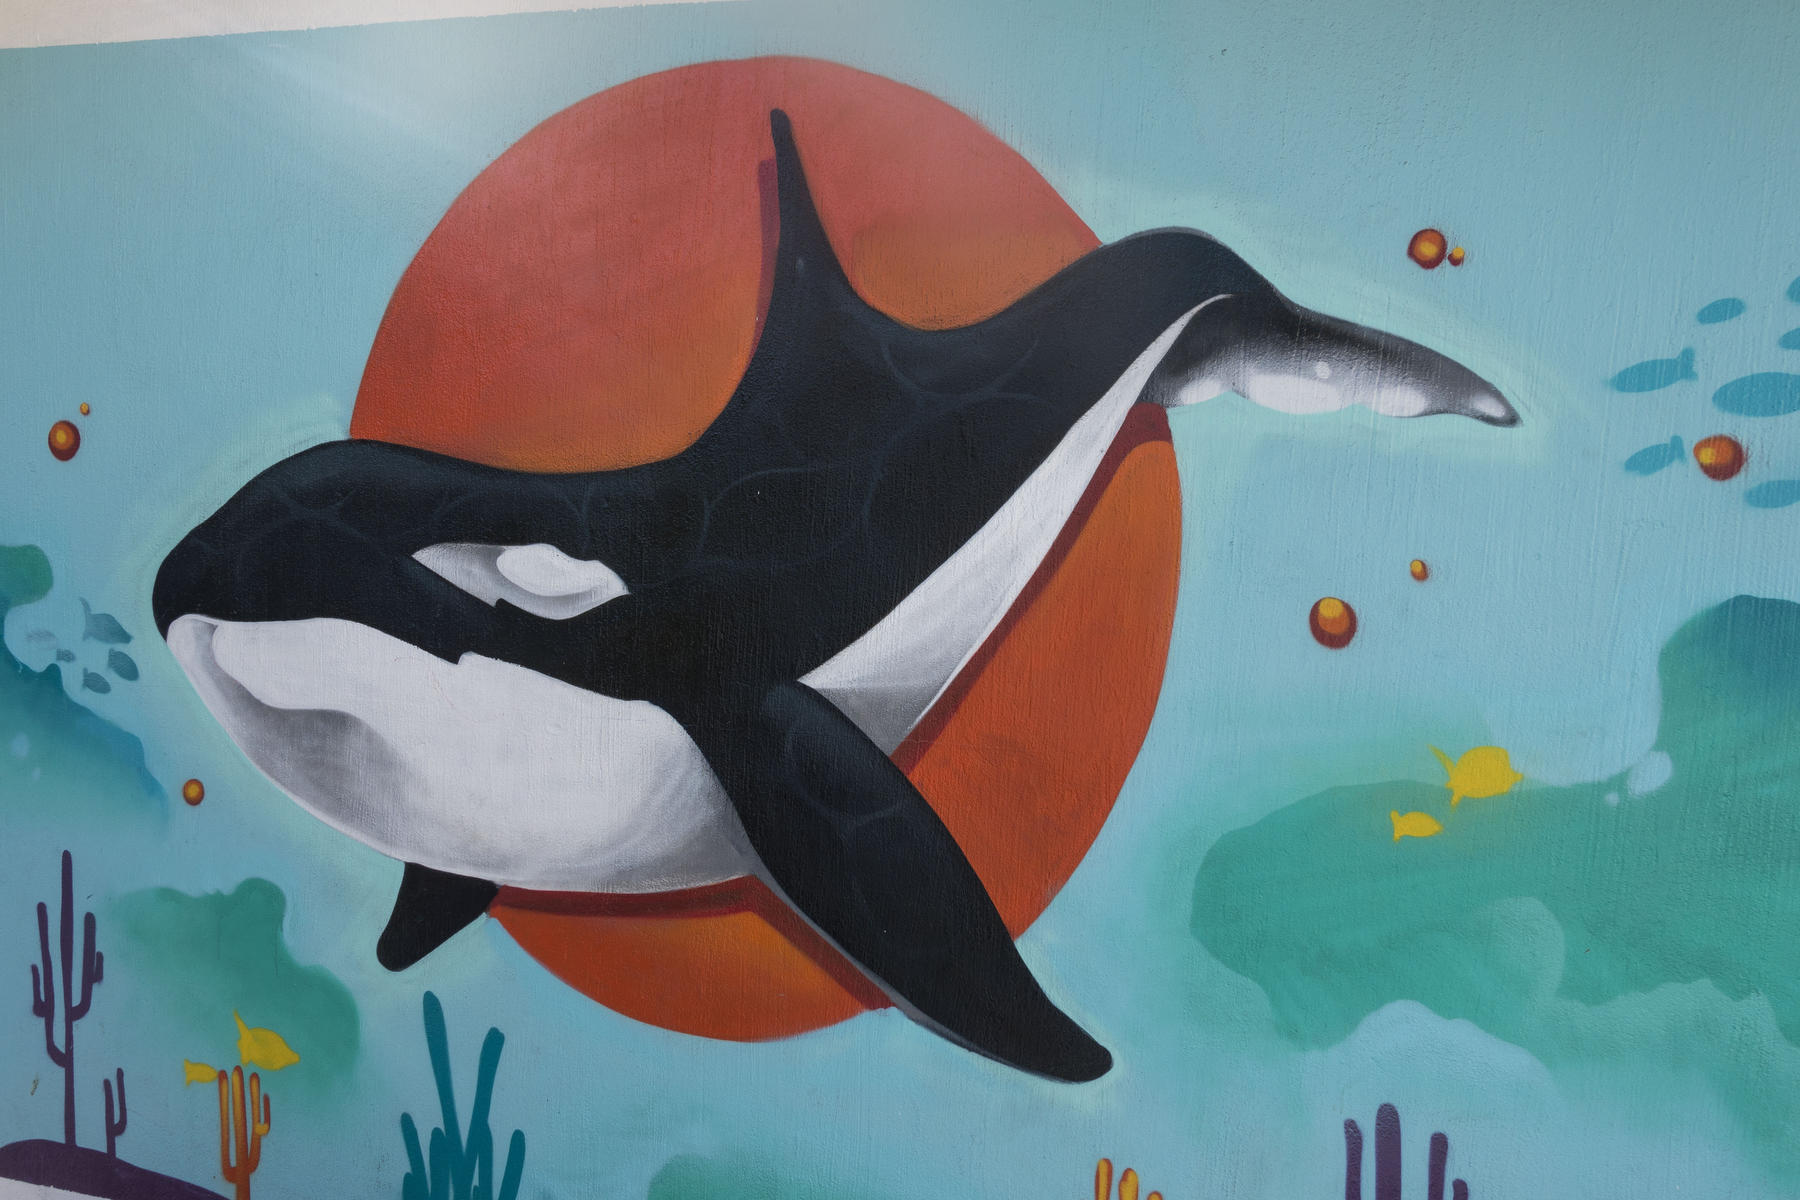 A killer whale orca painted as part of a Save the Reef project sponsored by a paint manufacturer : PUERTO VALLARTA - Wall Art & Bicycle Tour : Viviane Moos |  Documentary Photographer